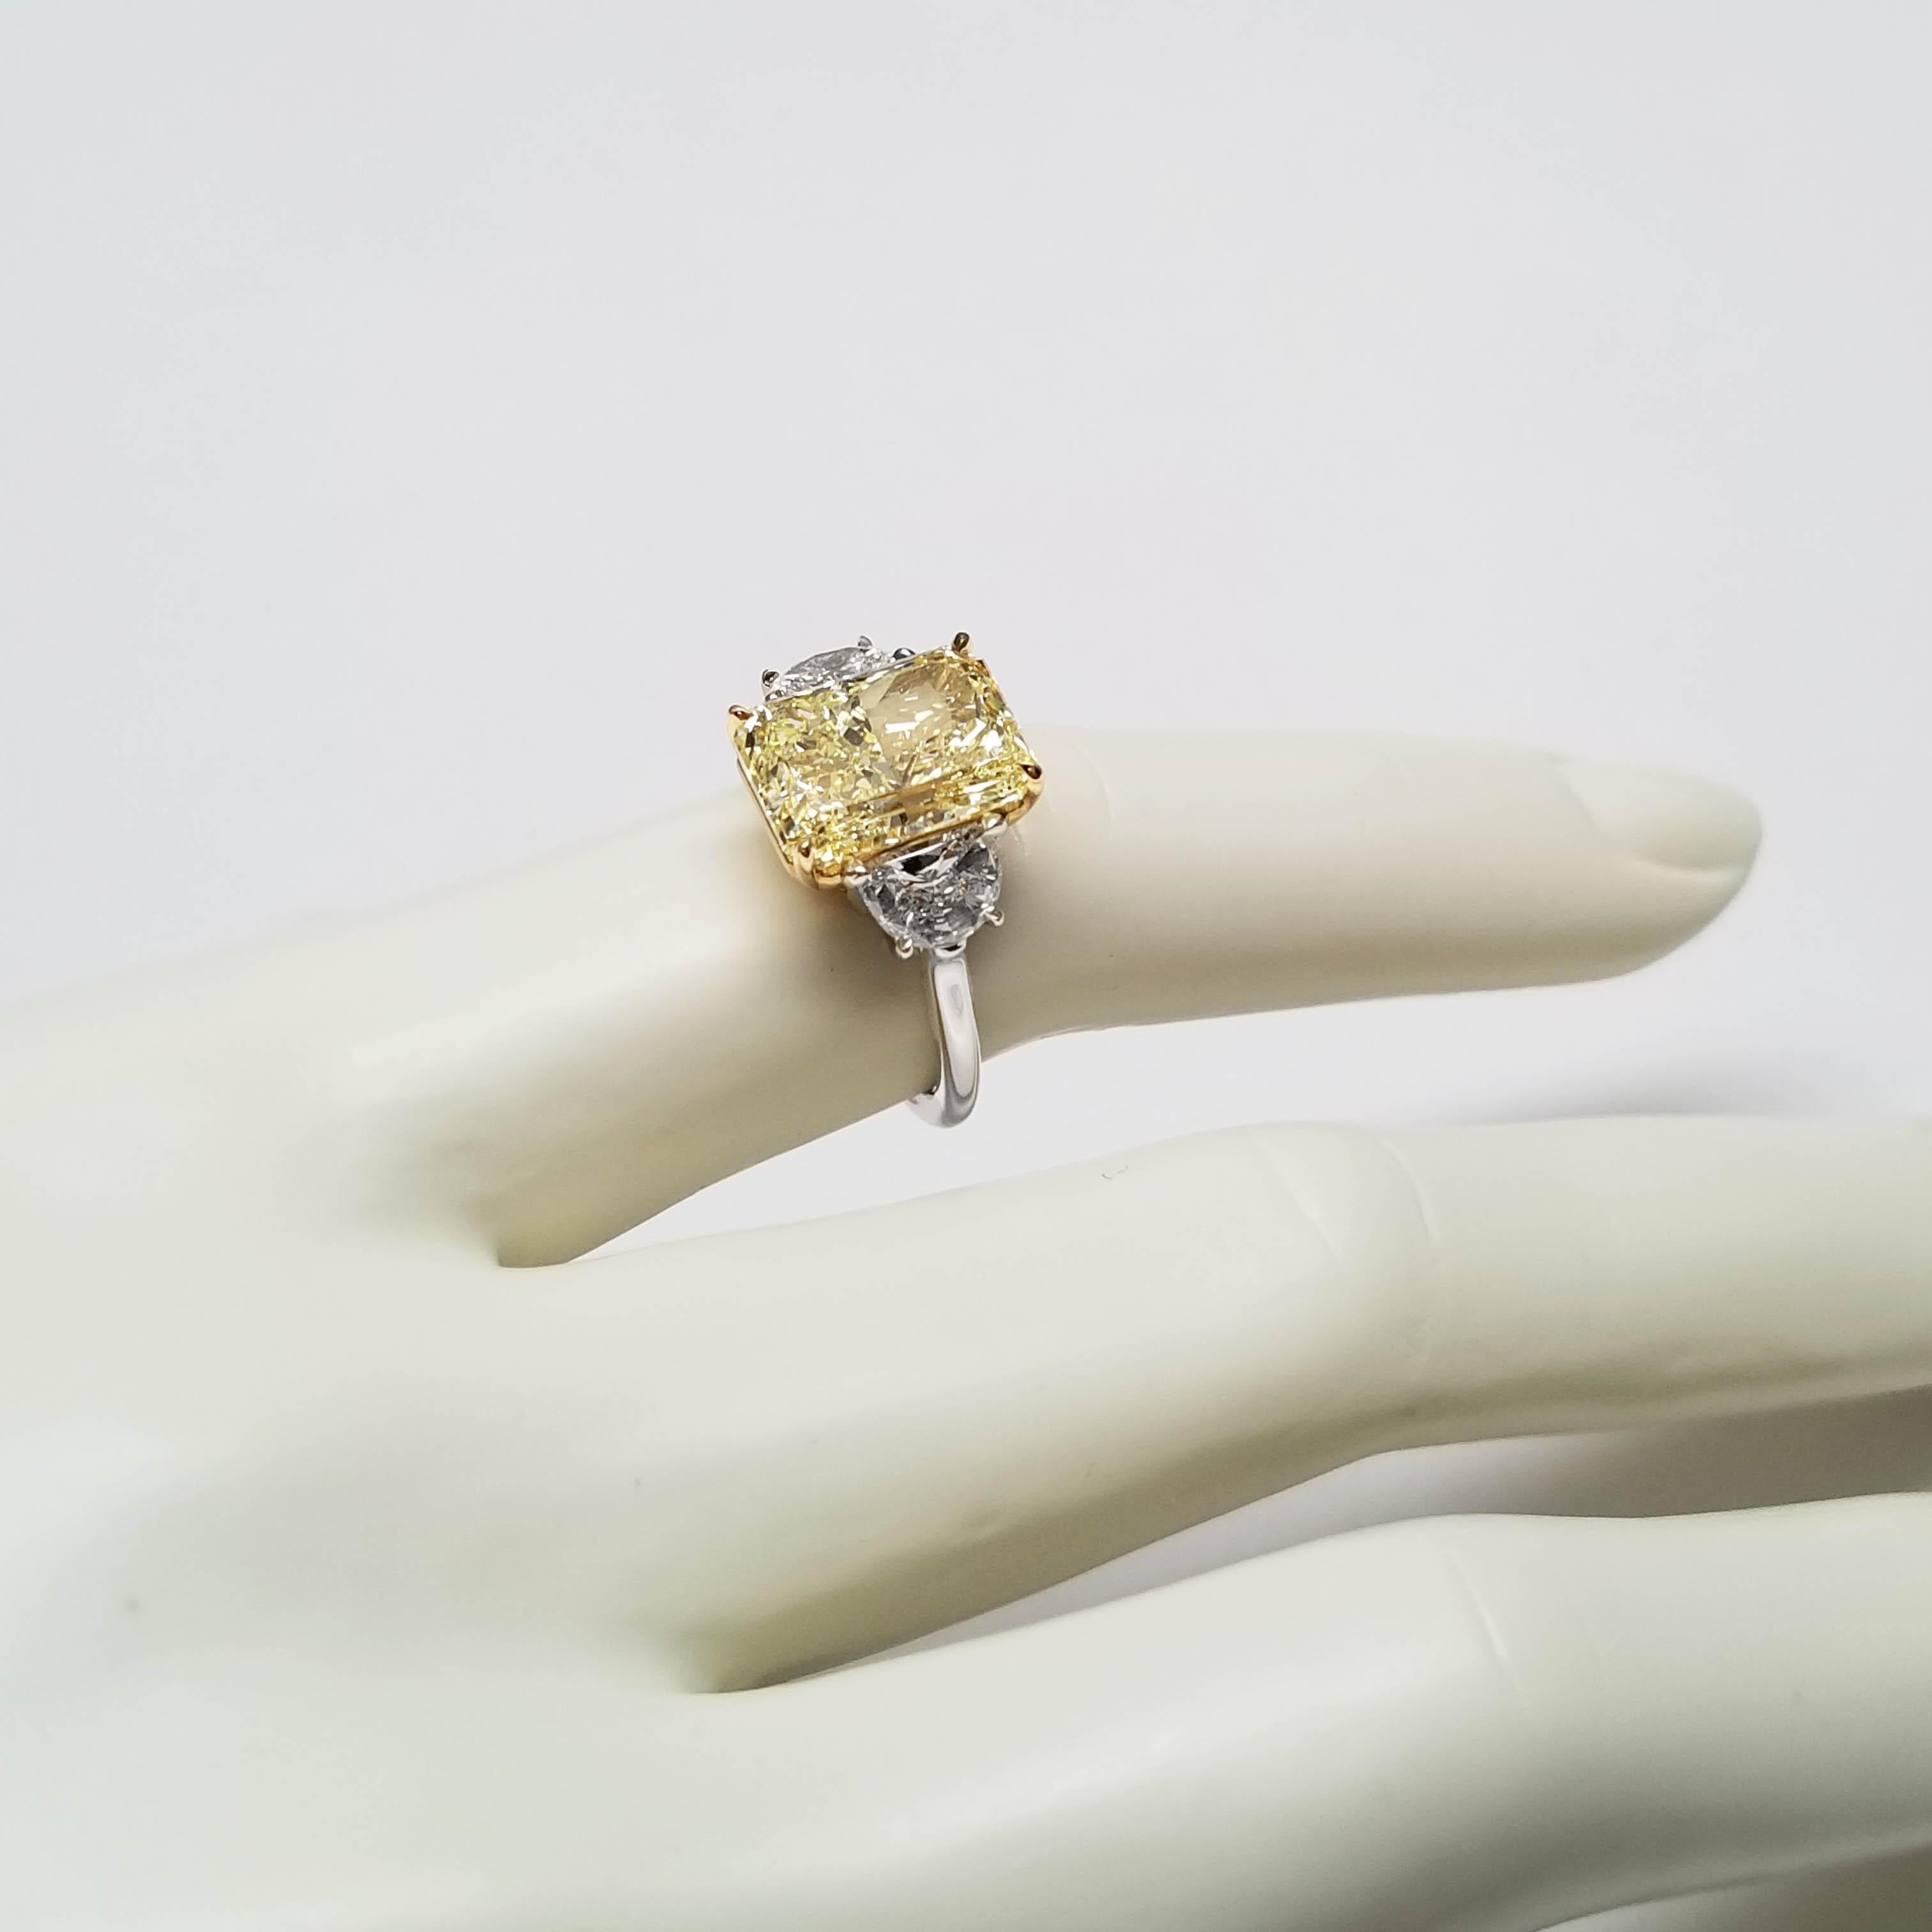 Contemporary Scarselli 6 Carat Fancy Yellow Diamond Engagement Ring GIA